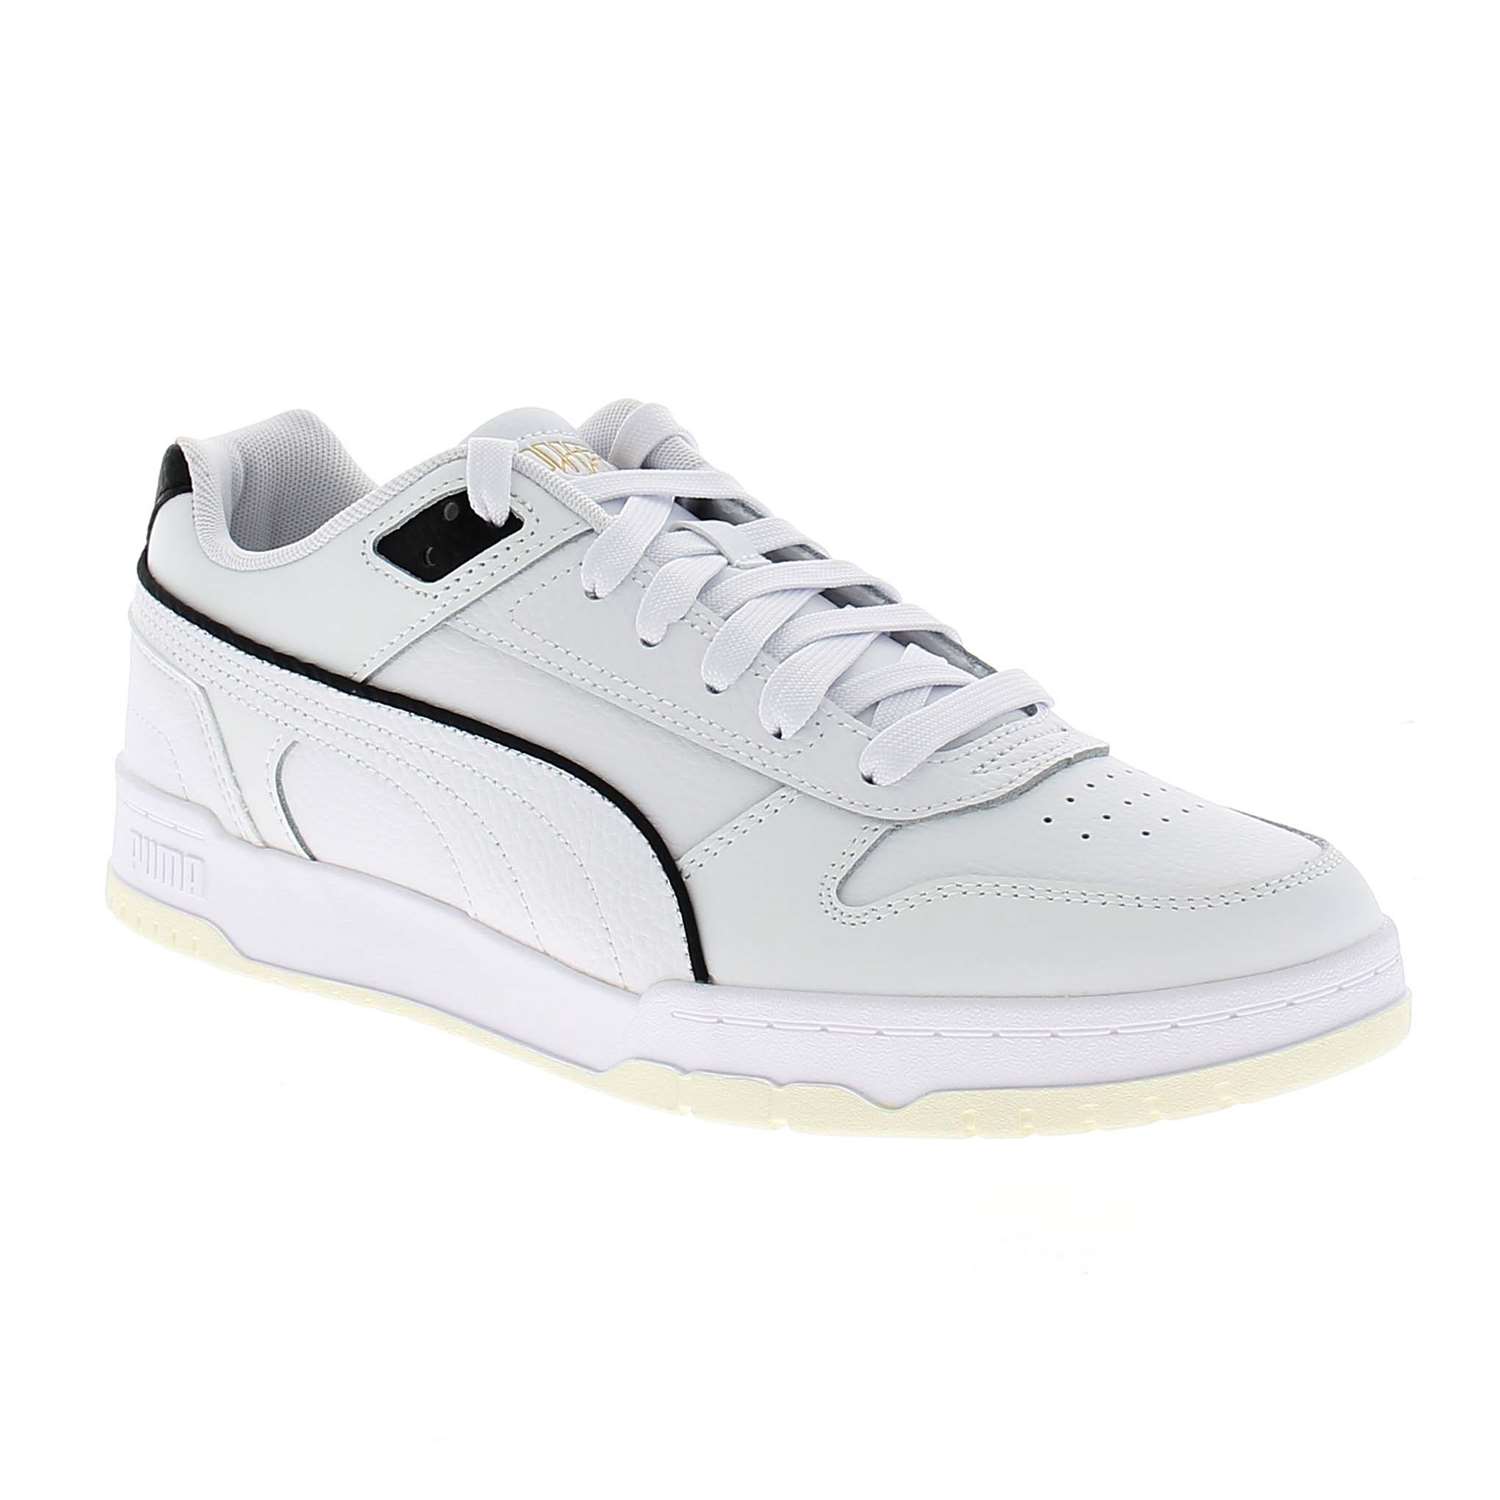 01 - RBD GAME LOW - PUMA - Baskets - Synthétique